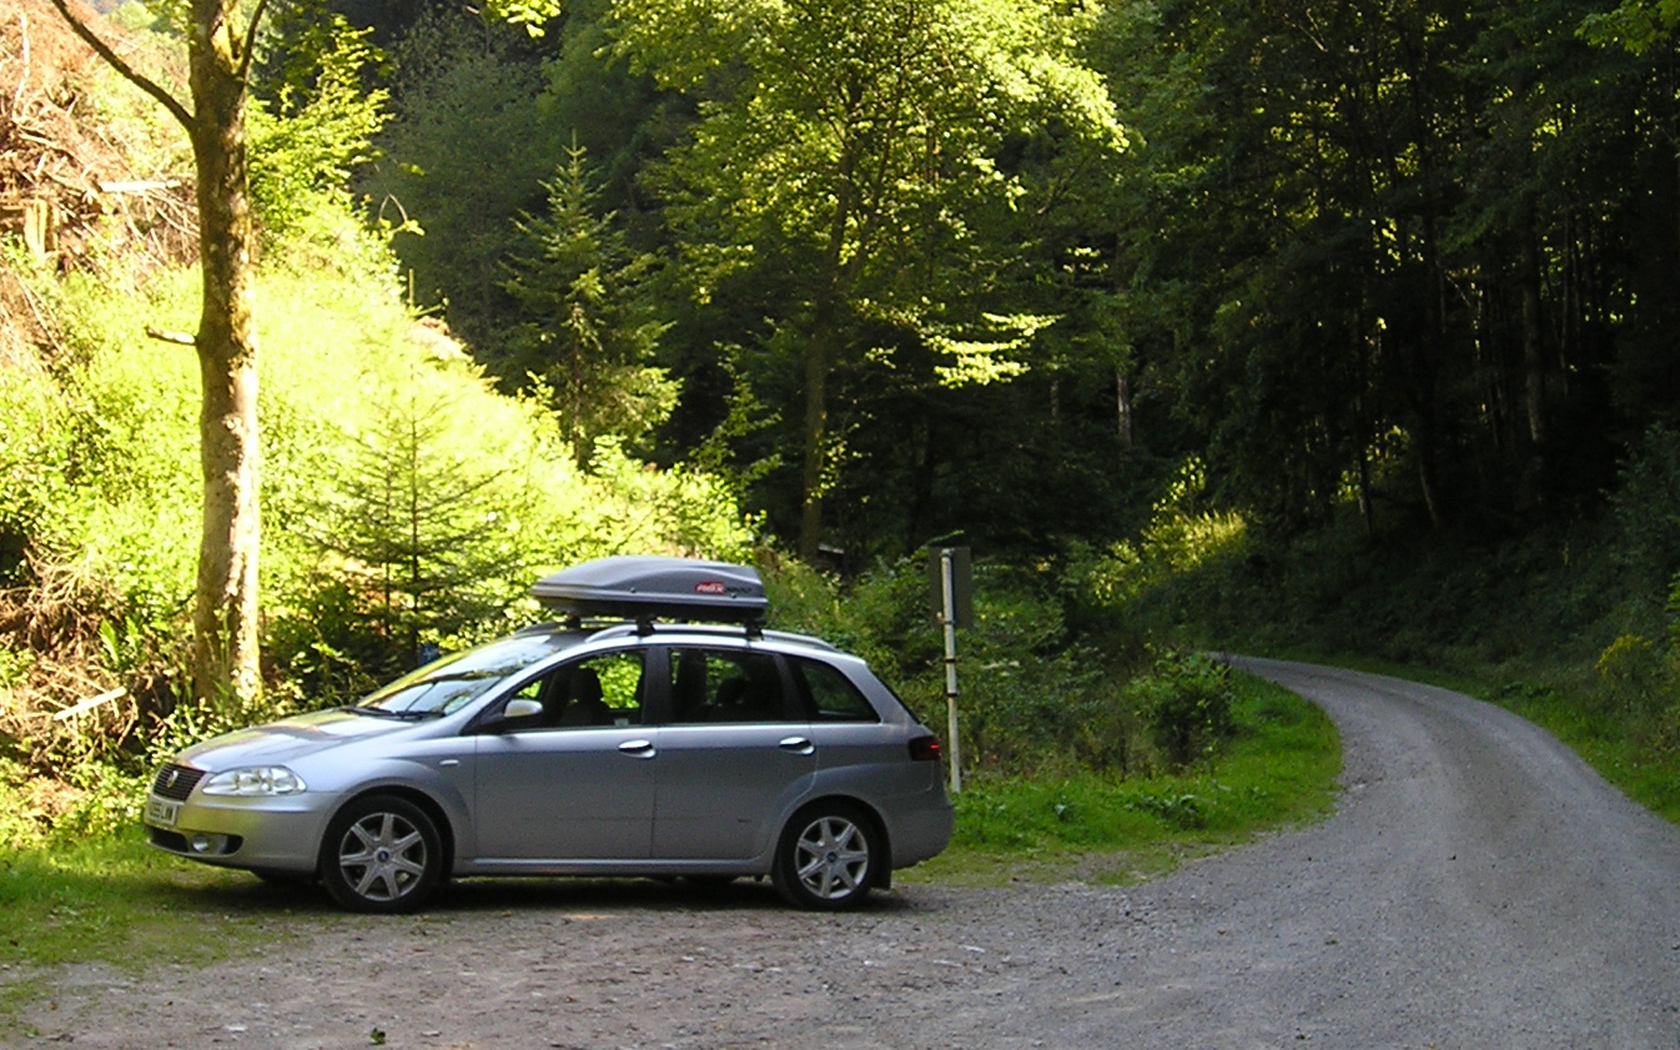 croma on Holiday in the Black forest